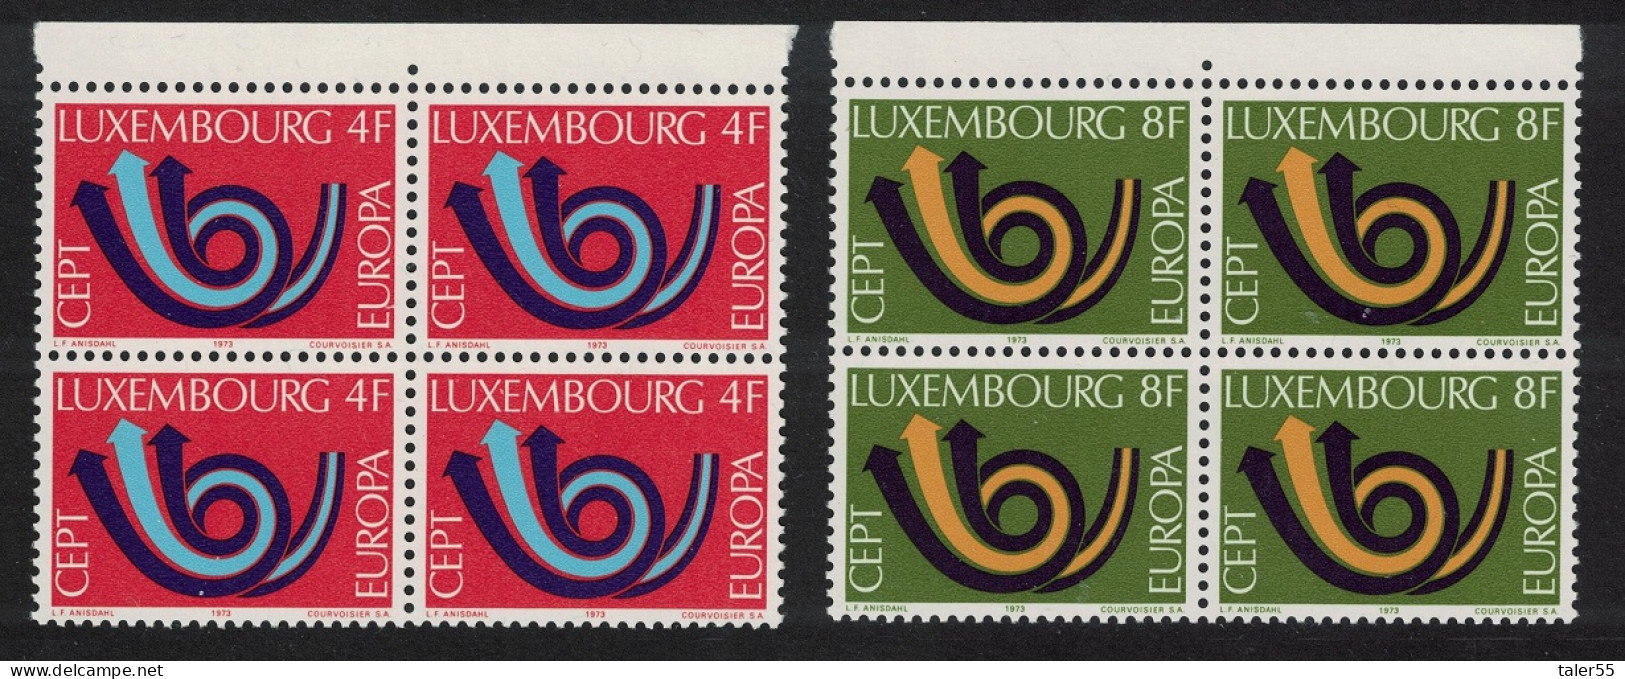 Luxembourg Post Horn Europa 2v Blocks Of 4 1973 MNH SG#906-907 MI#862-863 - Unused Stamps